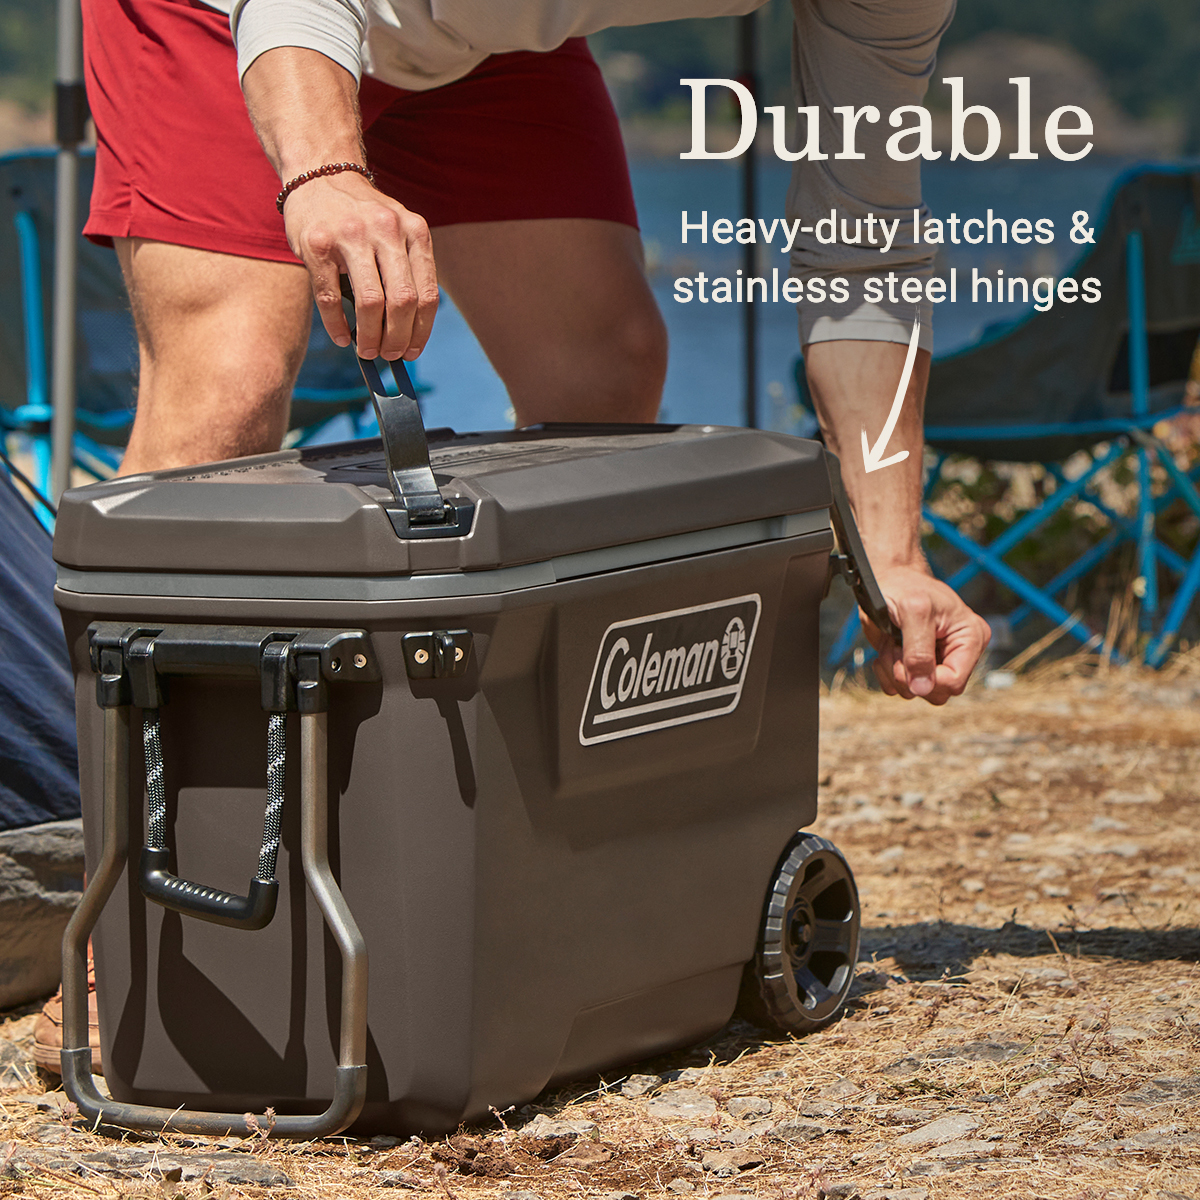 Coleman Convoy Series 65-Quart Hard Cooler with Wheels, up to 48 Cans, Brown Walnut Color - image 4 of 11